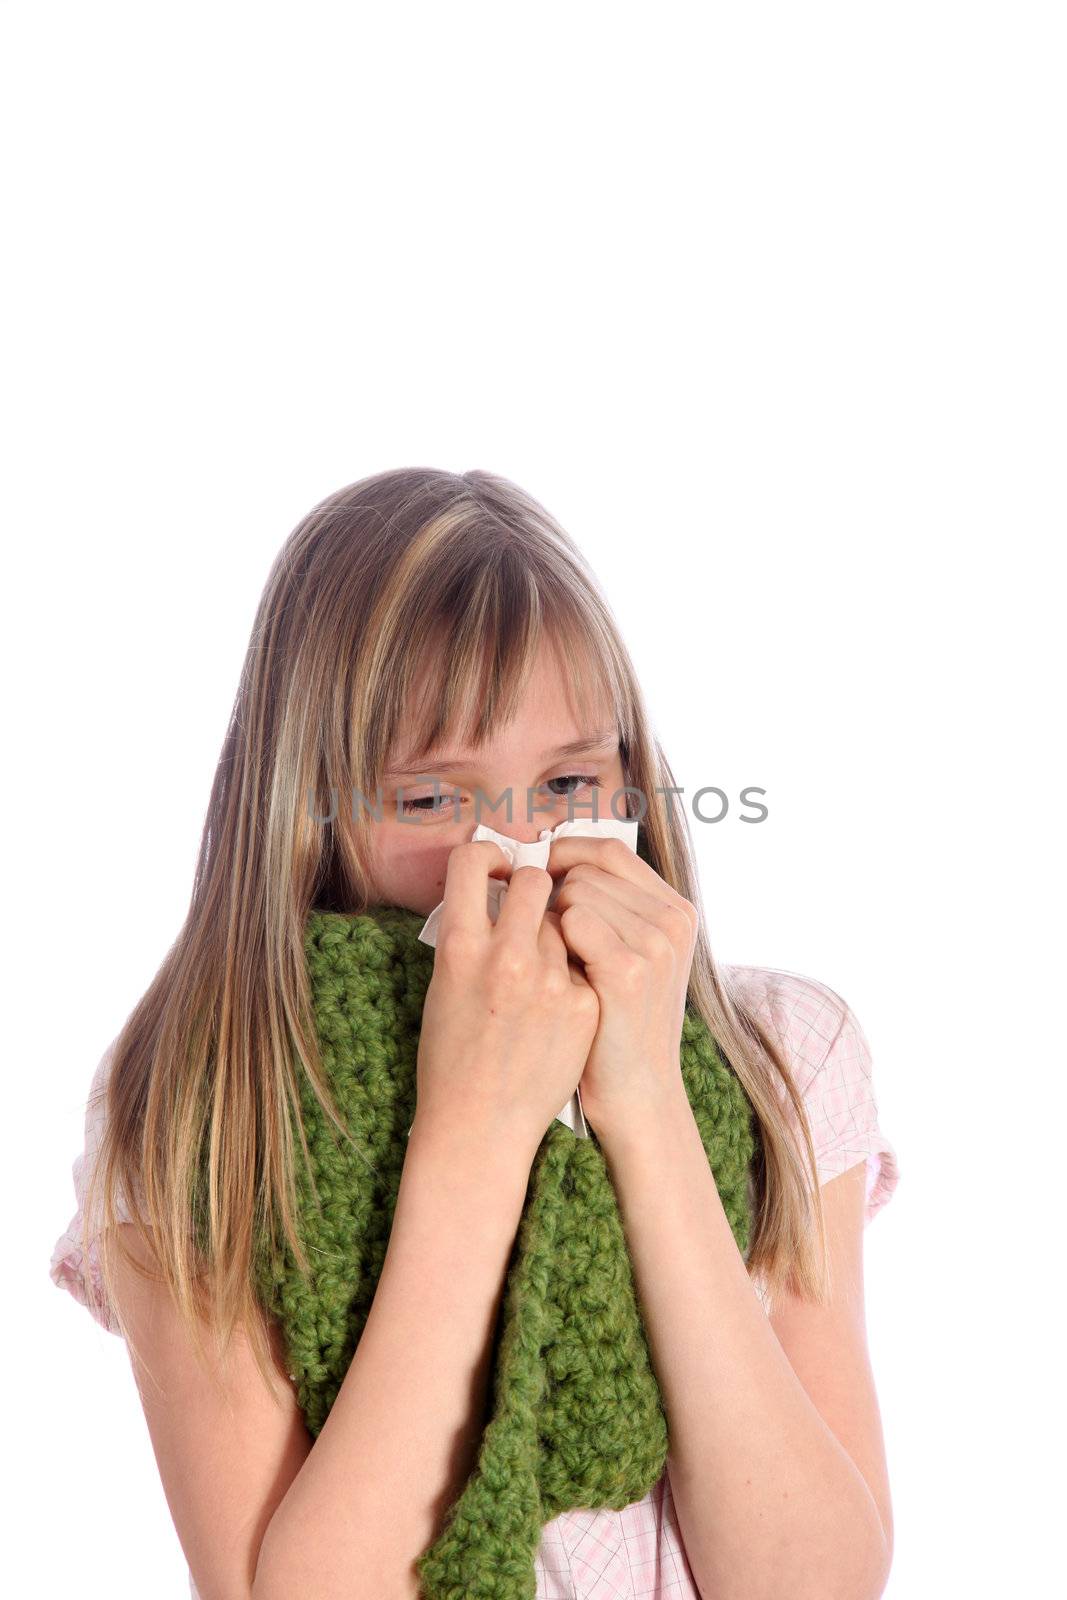 Sick, young girl  blows her nose by Farina6000